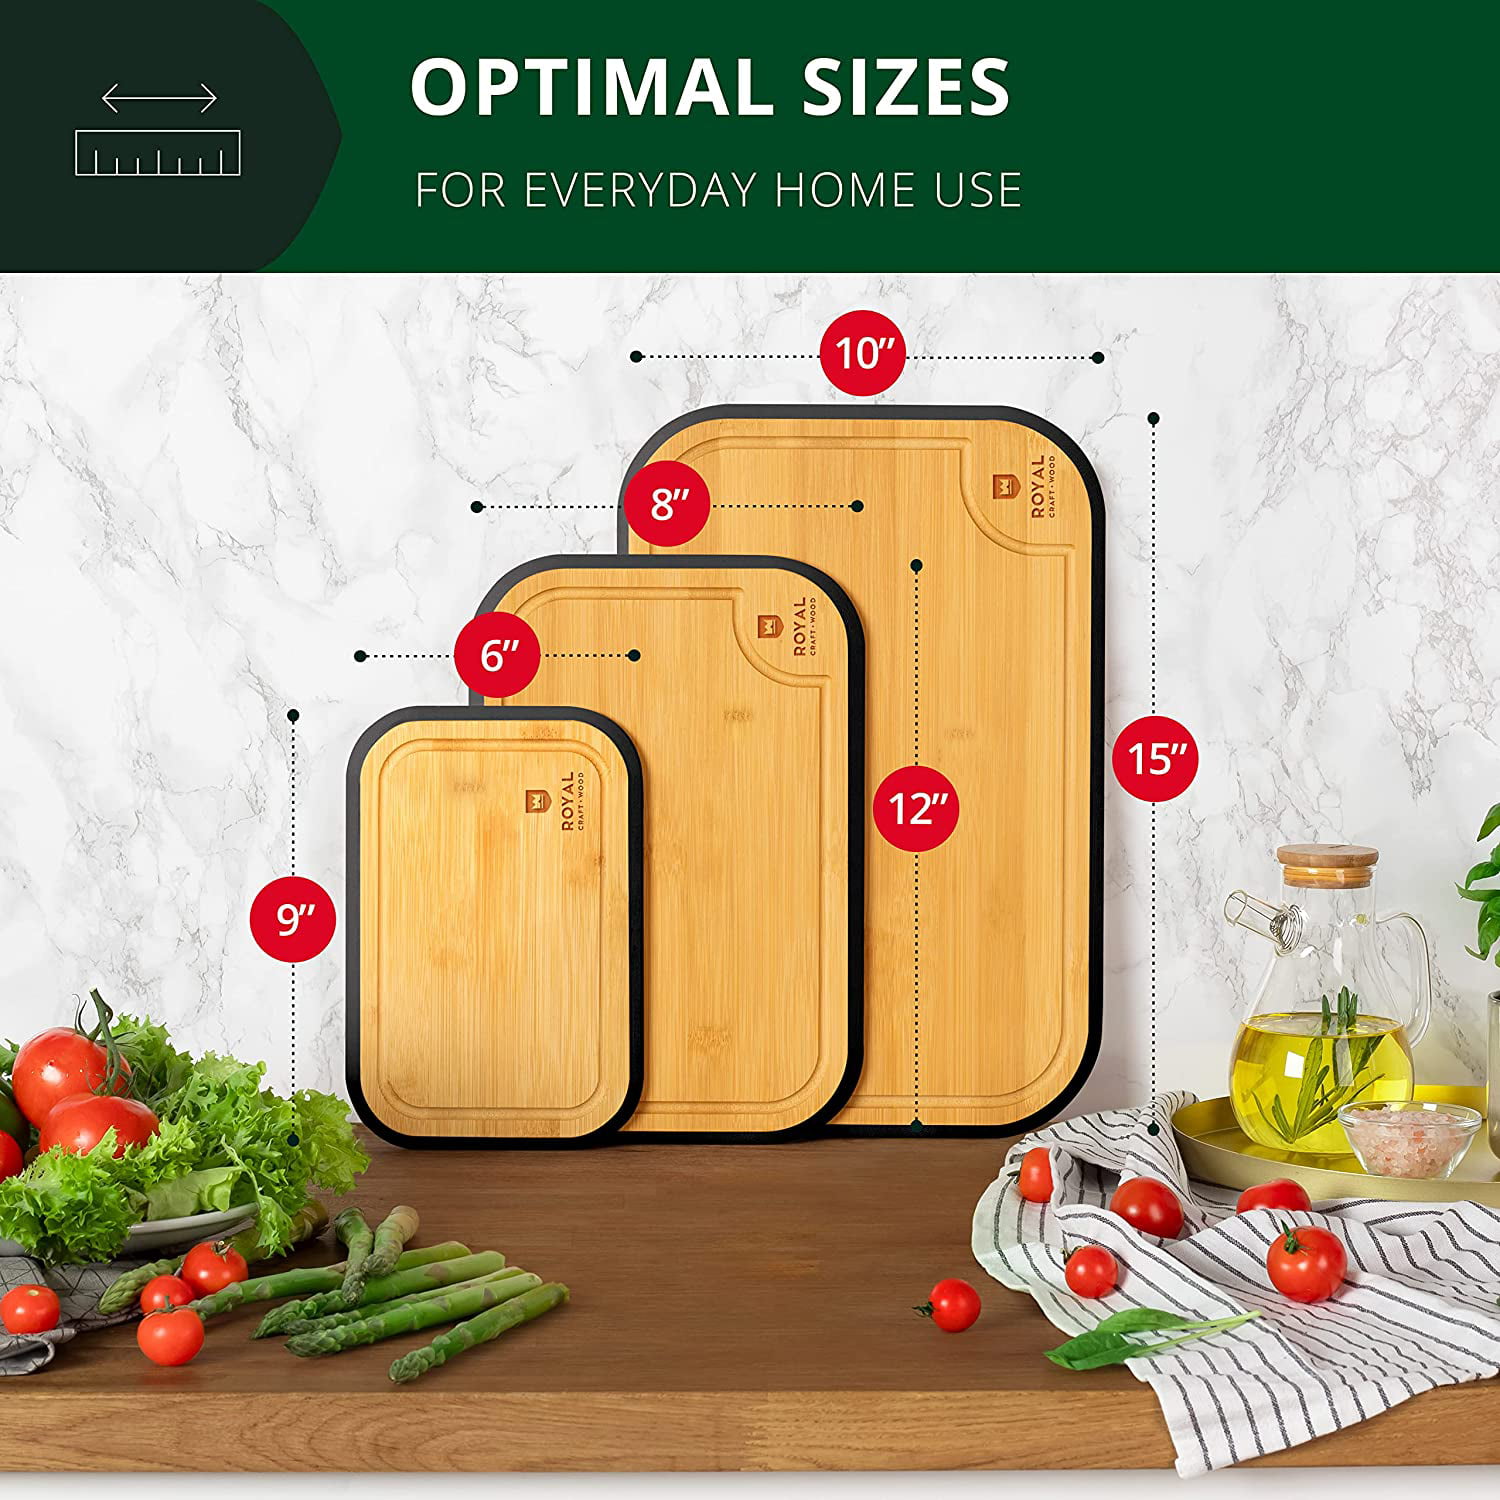 ROYAL CRAFT WOOD Bamboo Cutting Boards for Kitchen, Wood Chopping Boards  with Juice Groove, Two Tone Bamboo (Light and Dark)